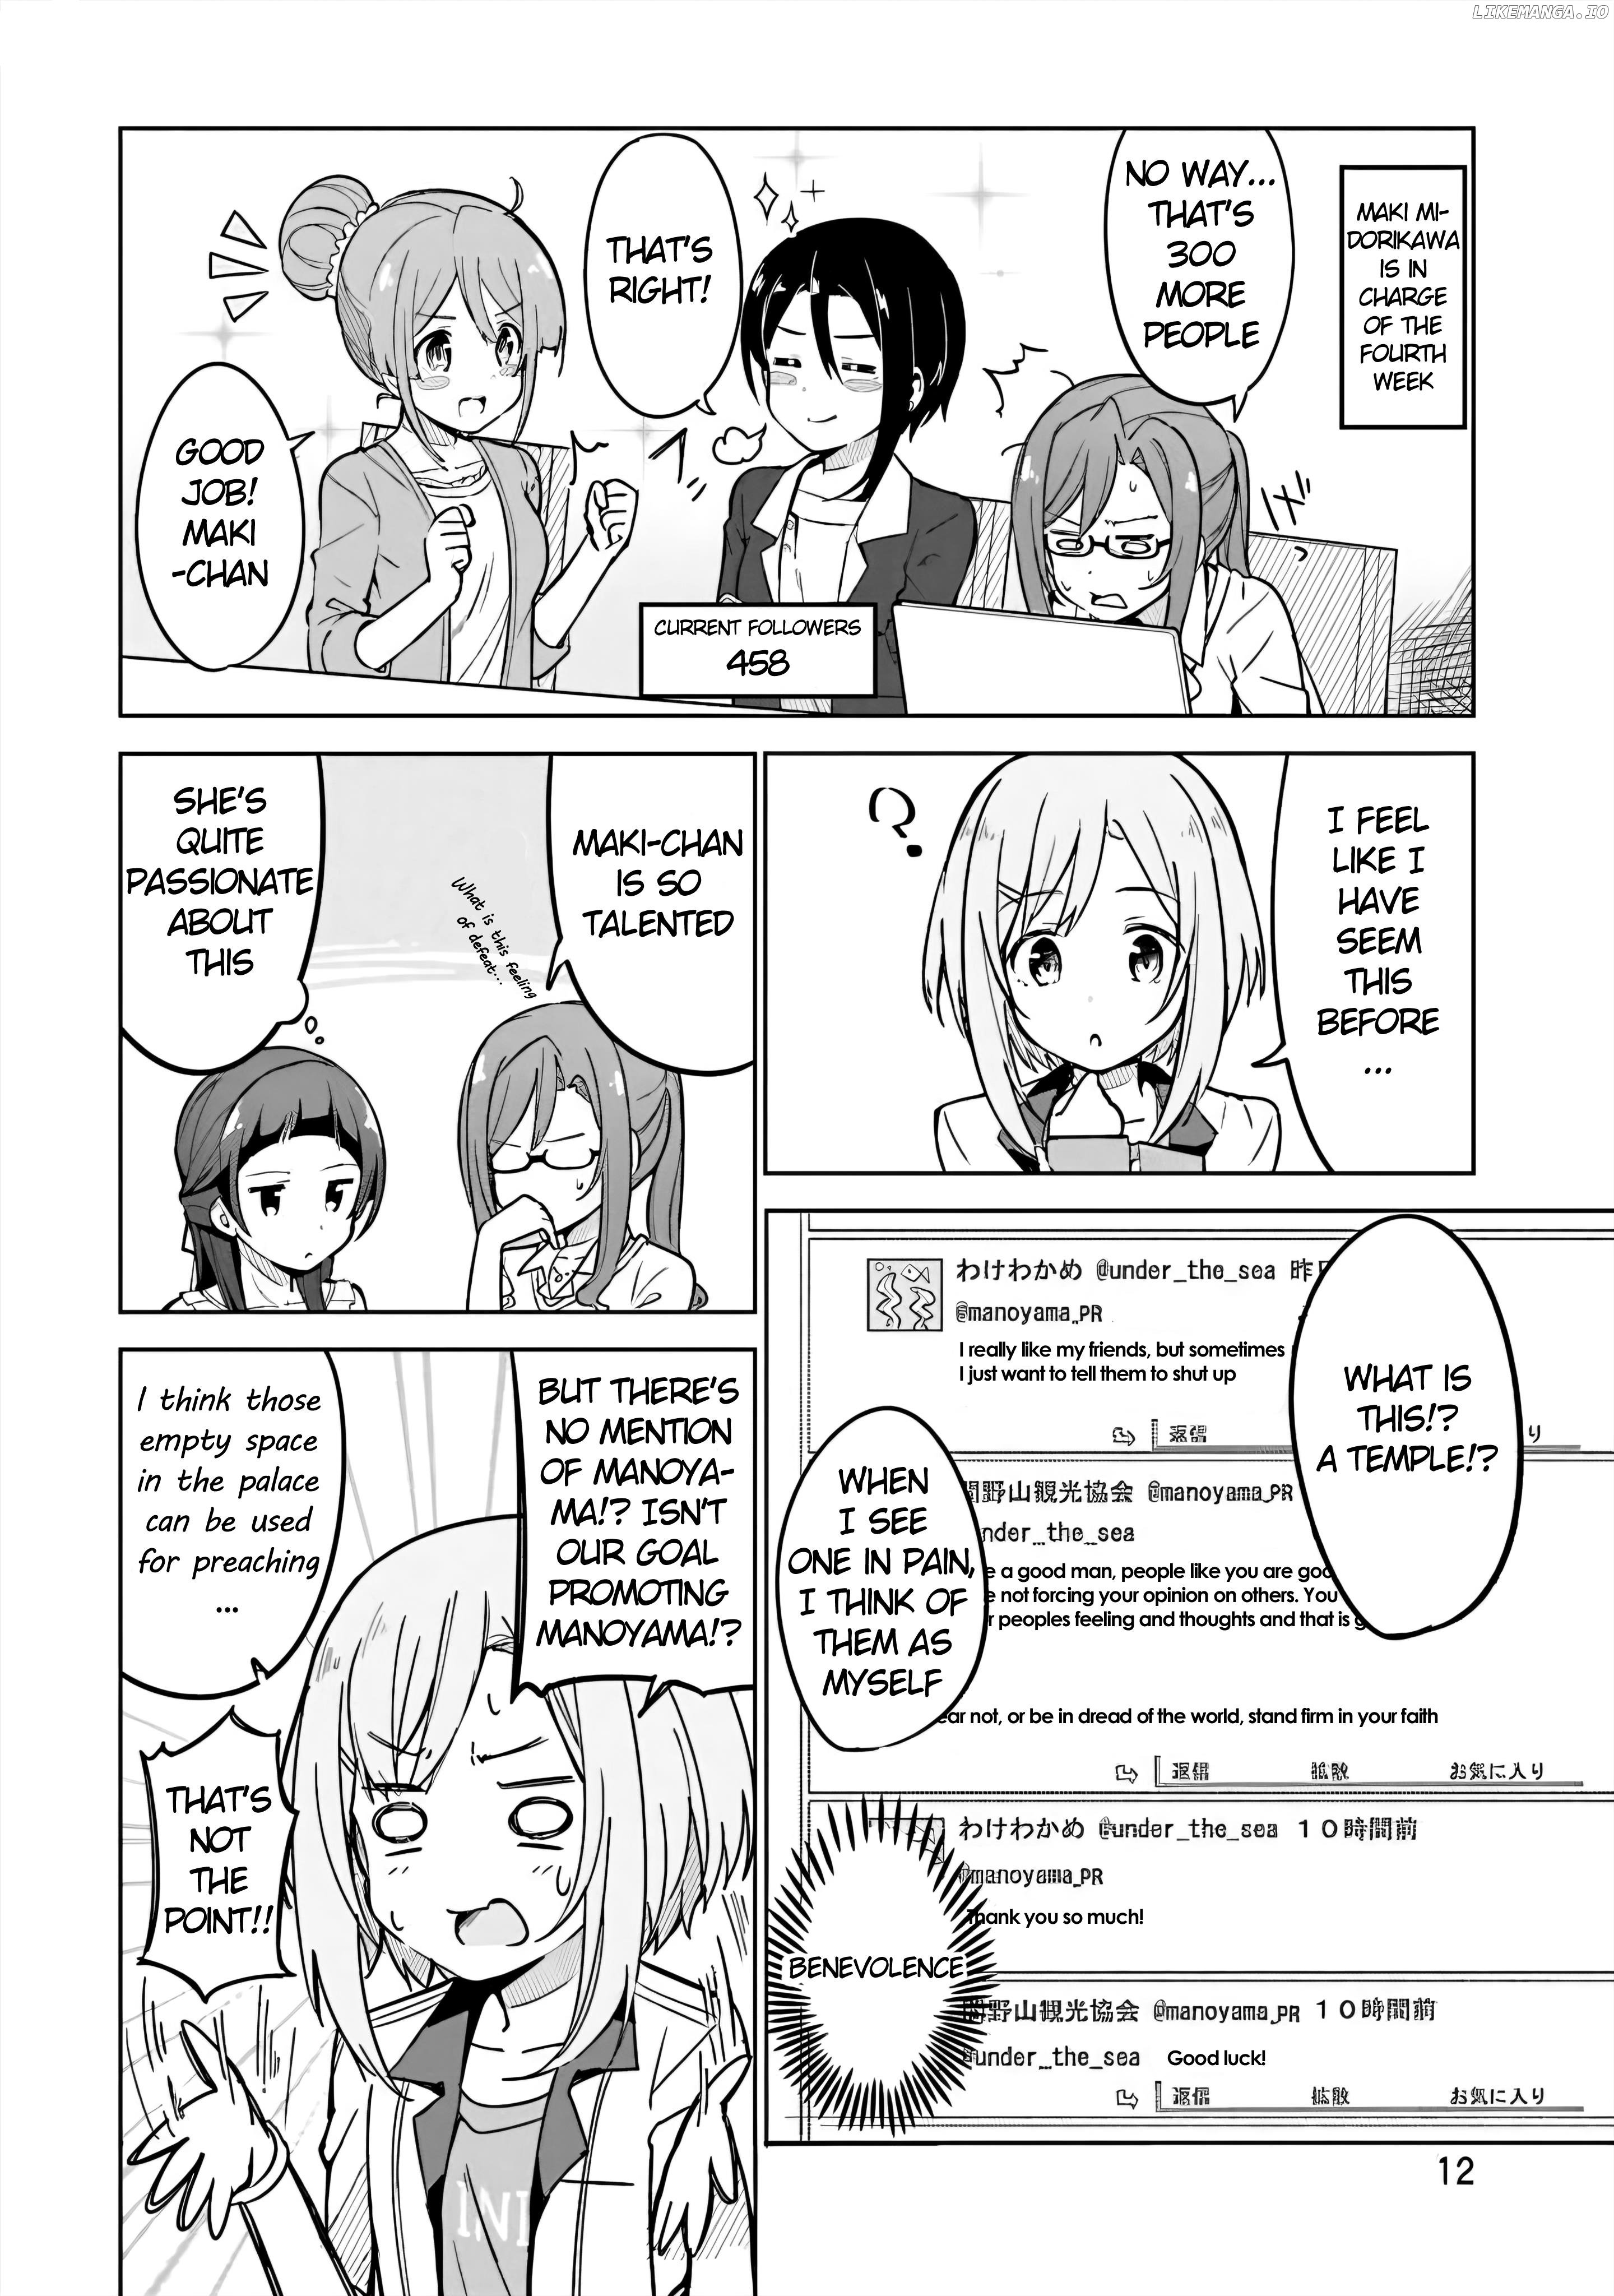 Sakura Quest Side Story: Ririko Oribe's Daily Report Vol 1 chapter 1 - page 13